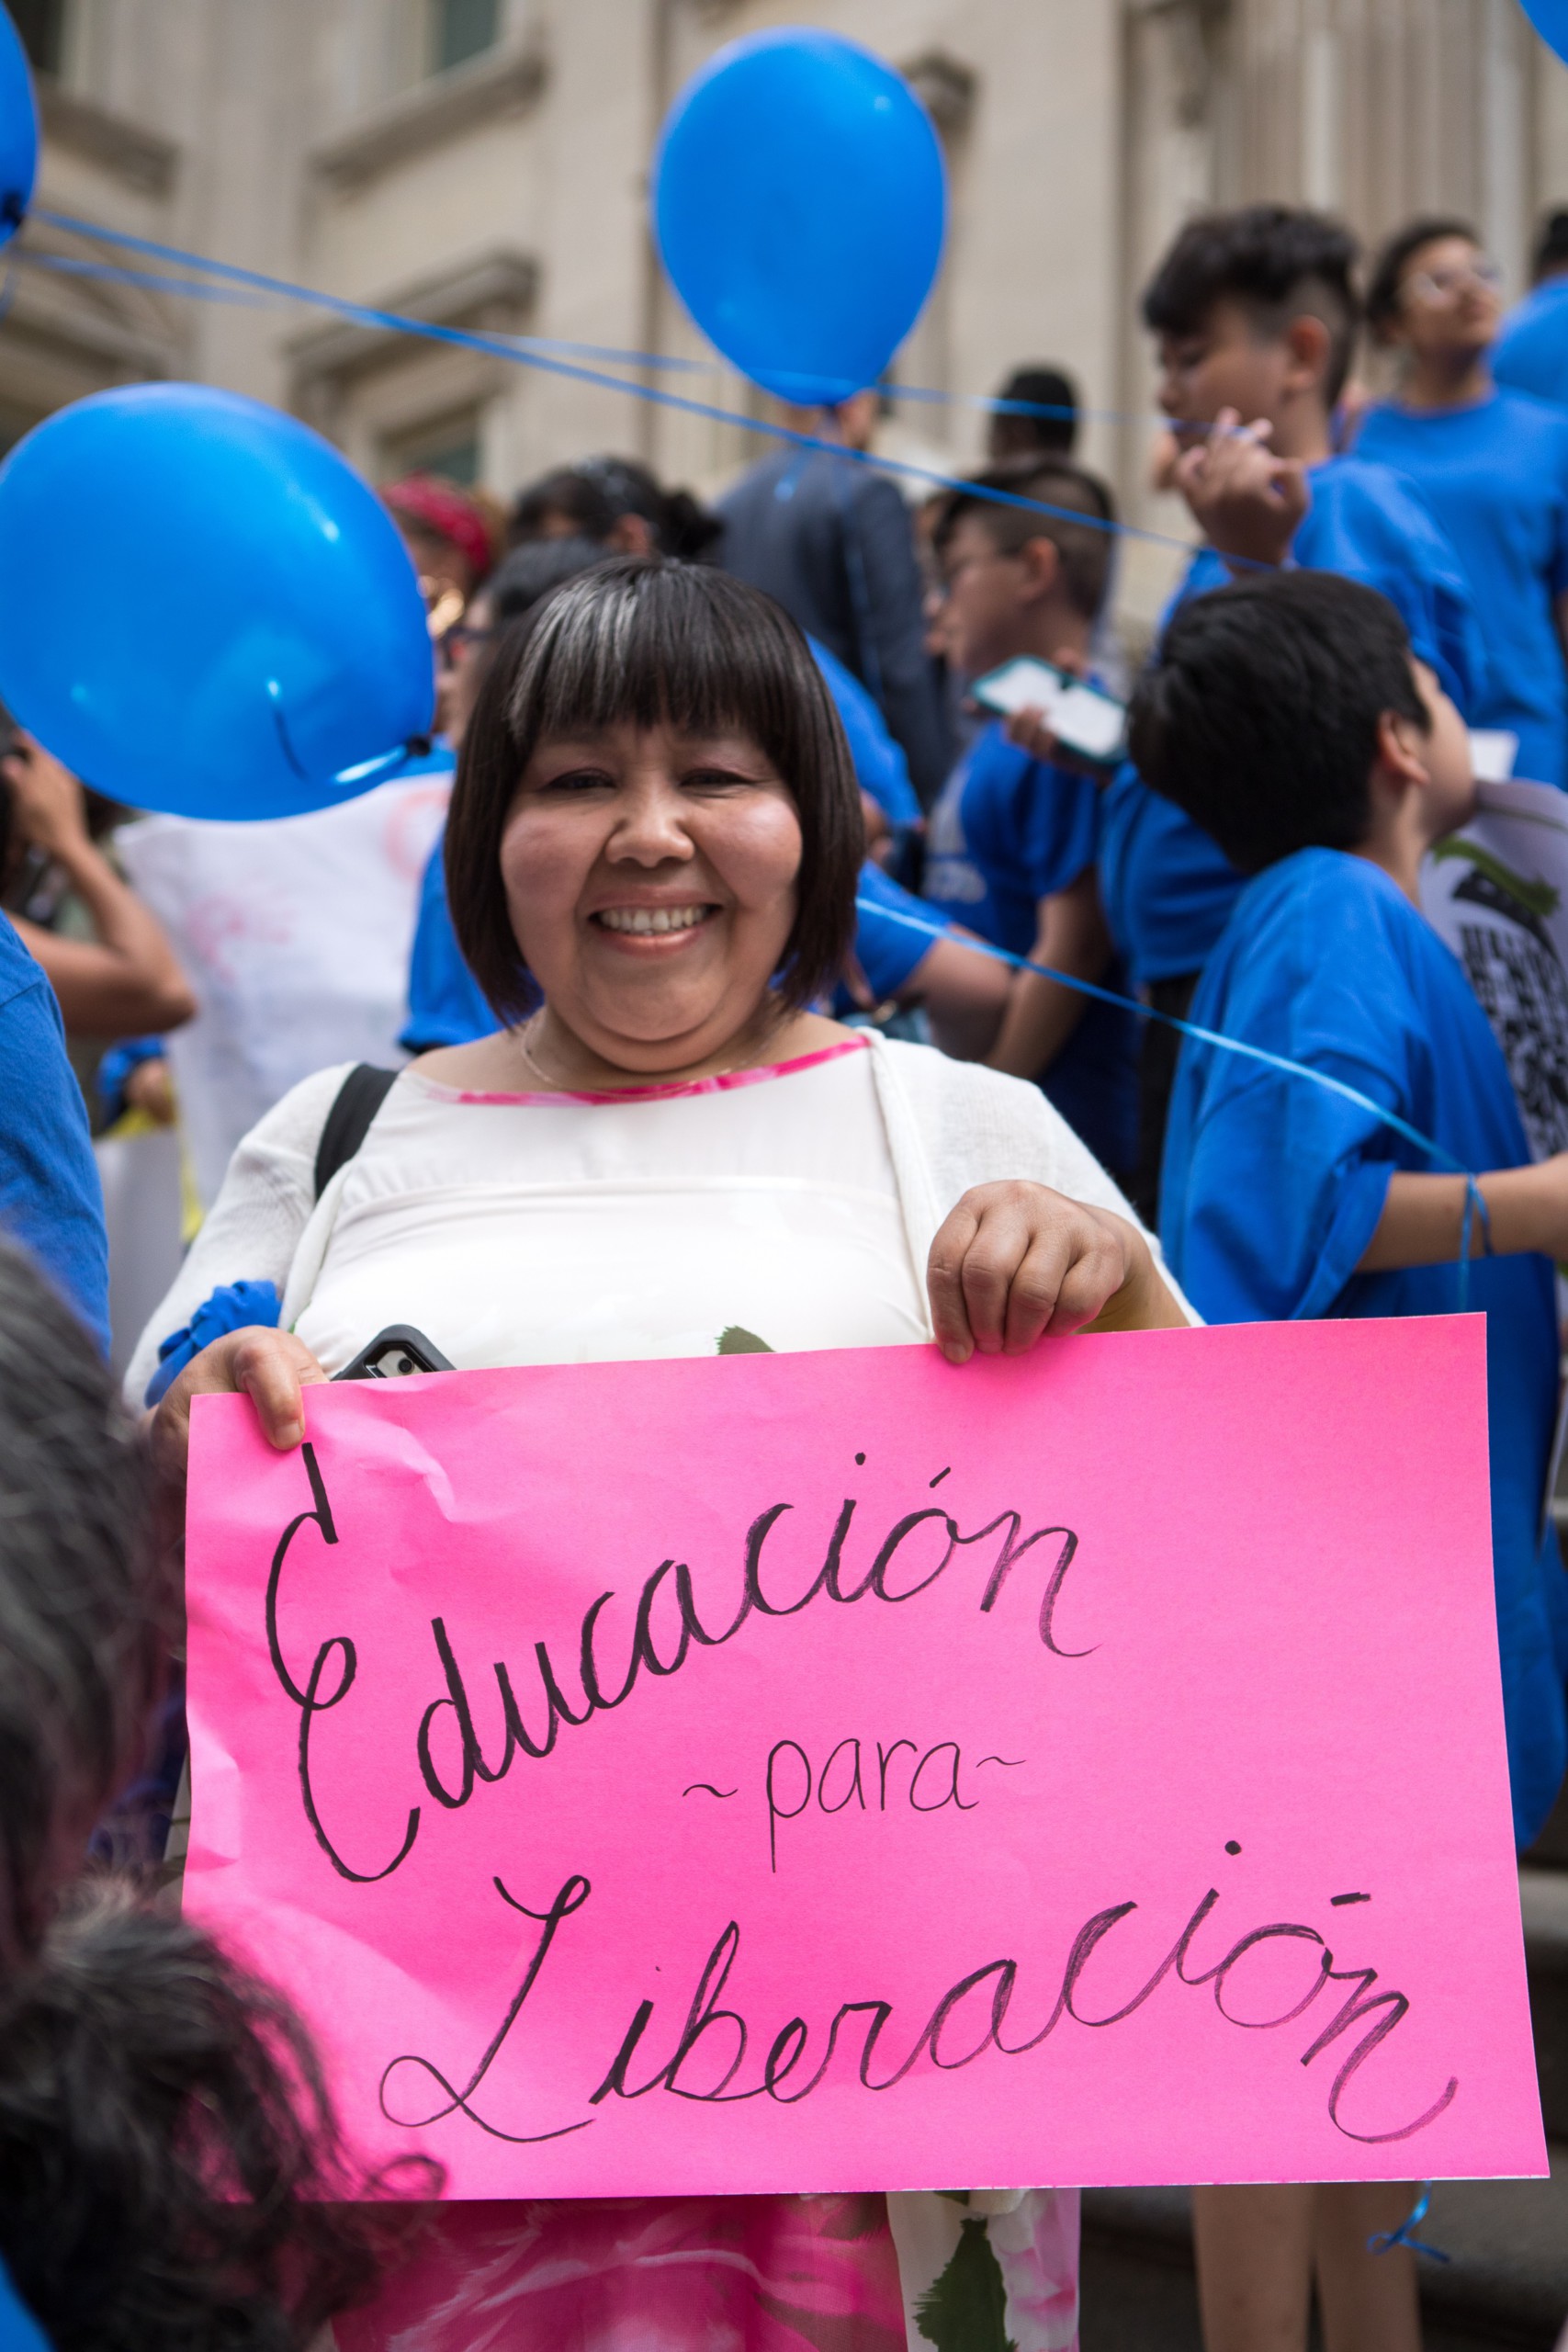 A smiling demonstrator holds up a sign that reads, "Educacion para liberacion," during a NYC Coalition for Educational Justice rally.